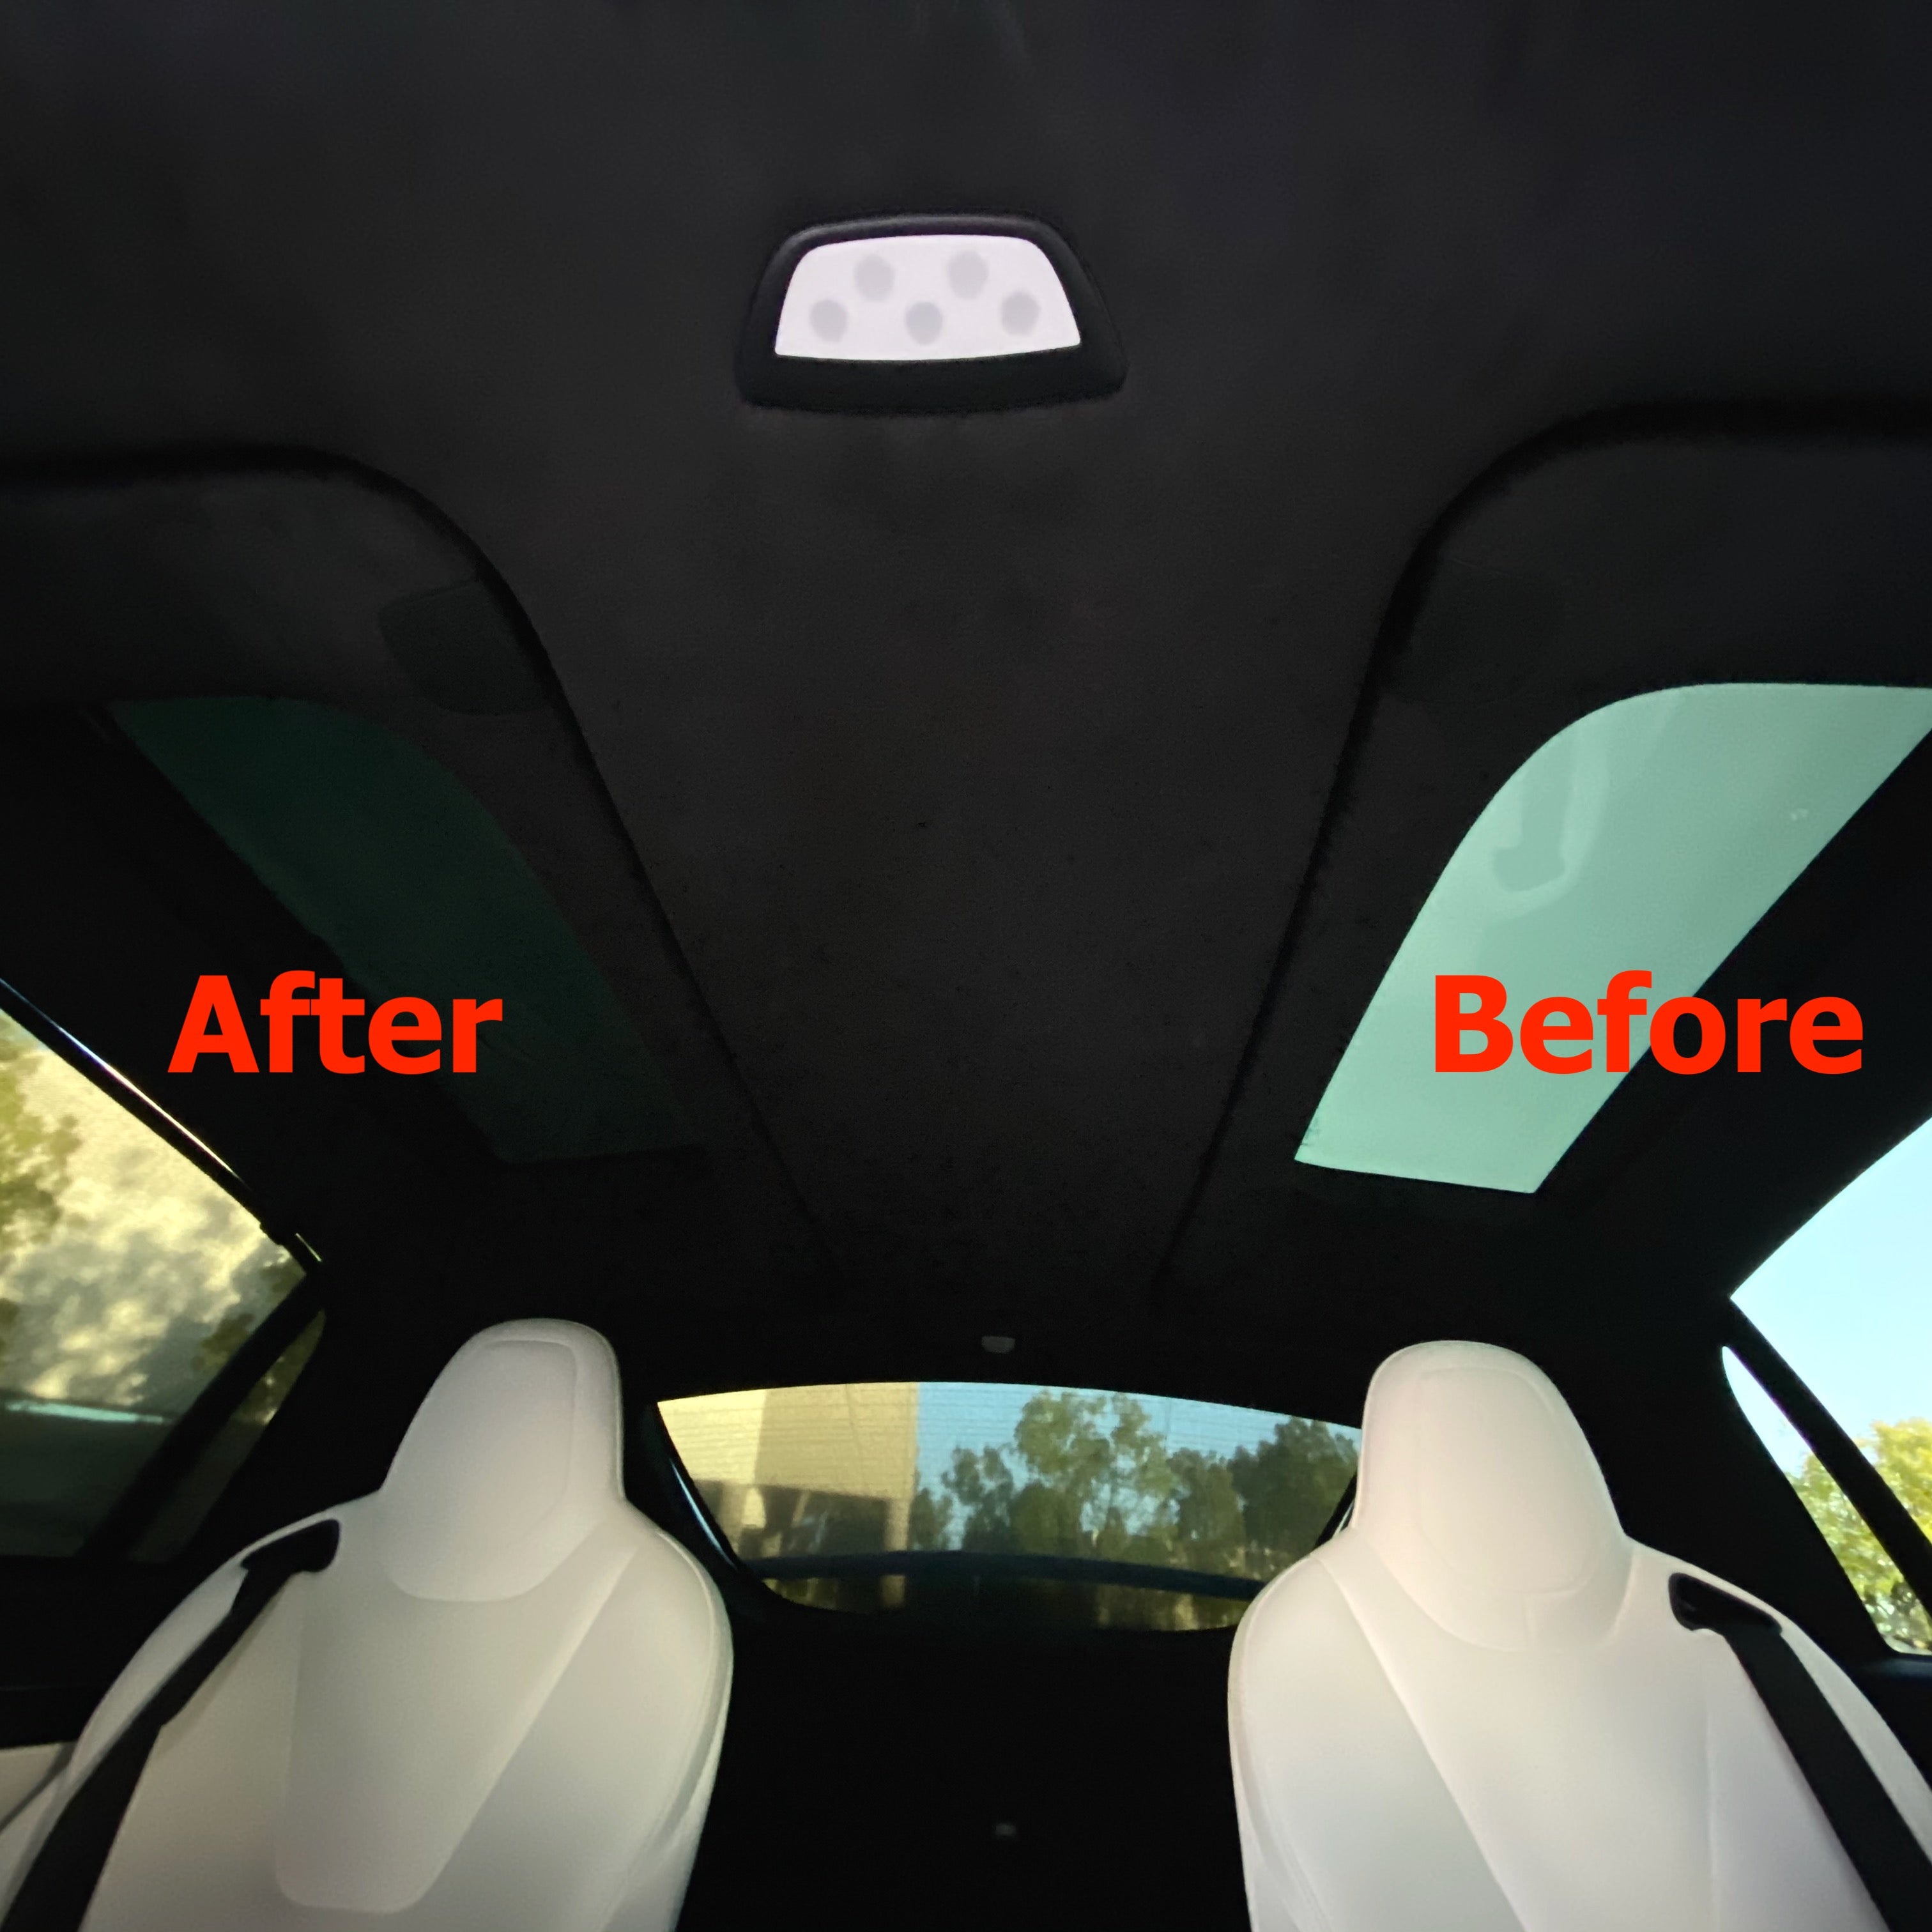 Sun protection pleated blind Tesla Model Y